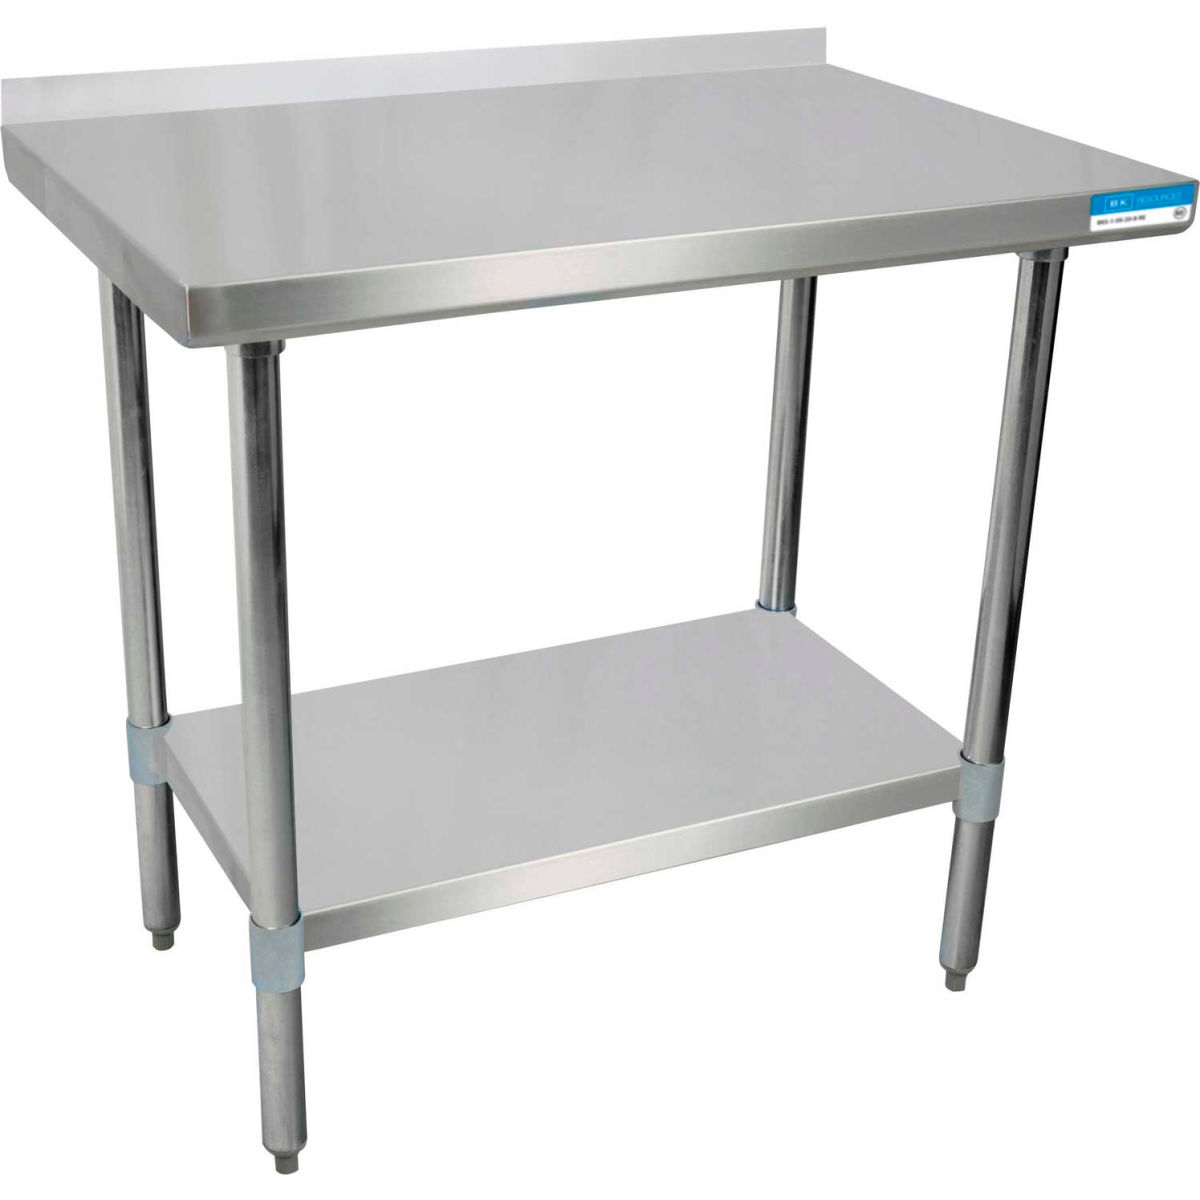 Picture of BK Resources B0899574 18 Gauge 430 Series Stainless Workbench with Undershelf & 1.5 in. Backsplash - 36 x 24 in.